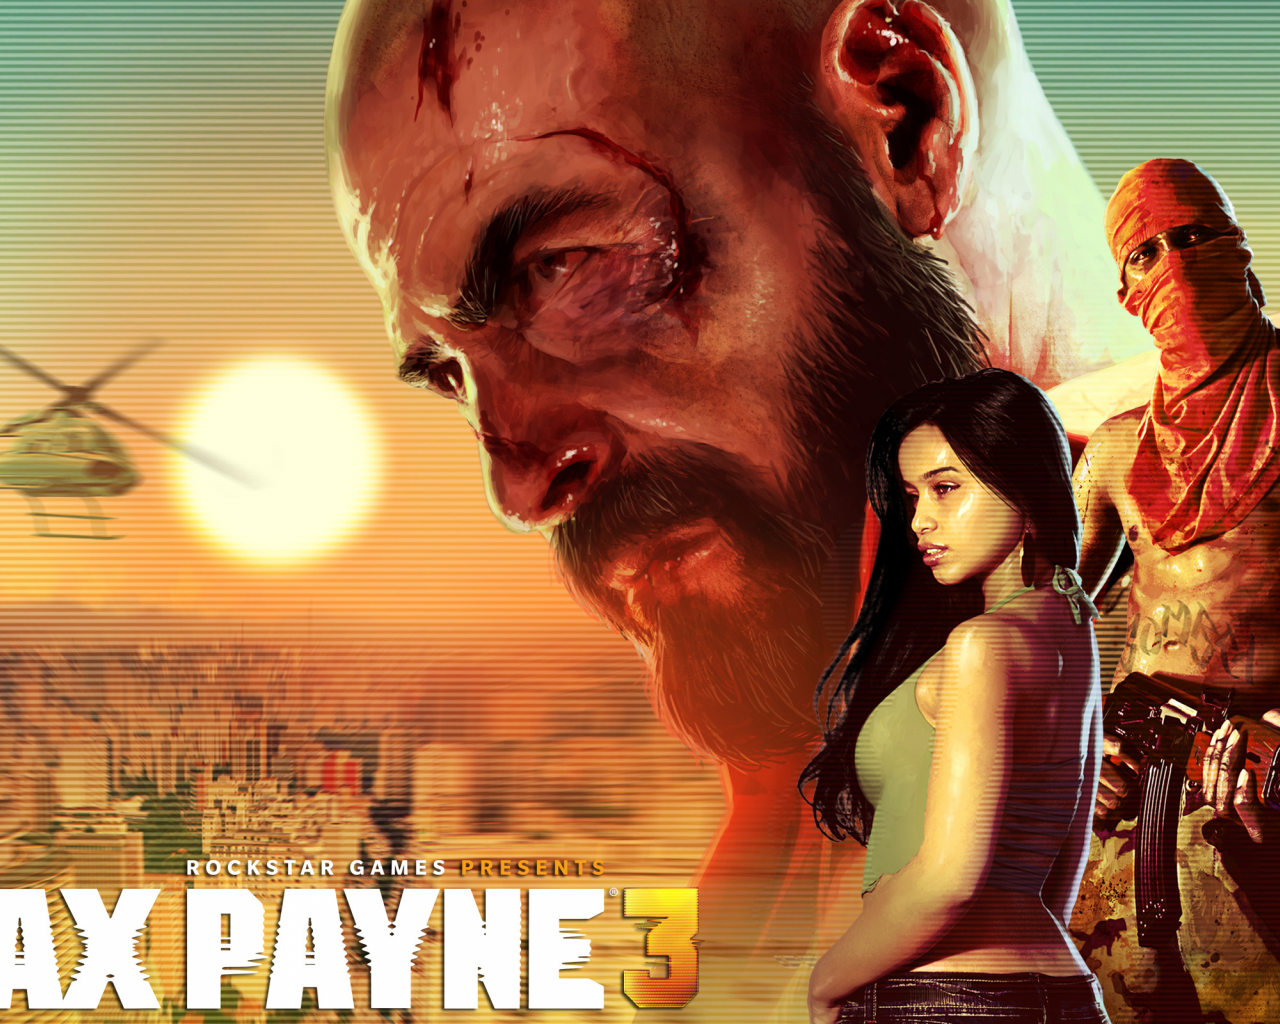 city, helicopter, sun, girl, ak-47, max payne 3